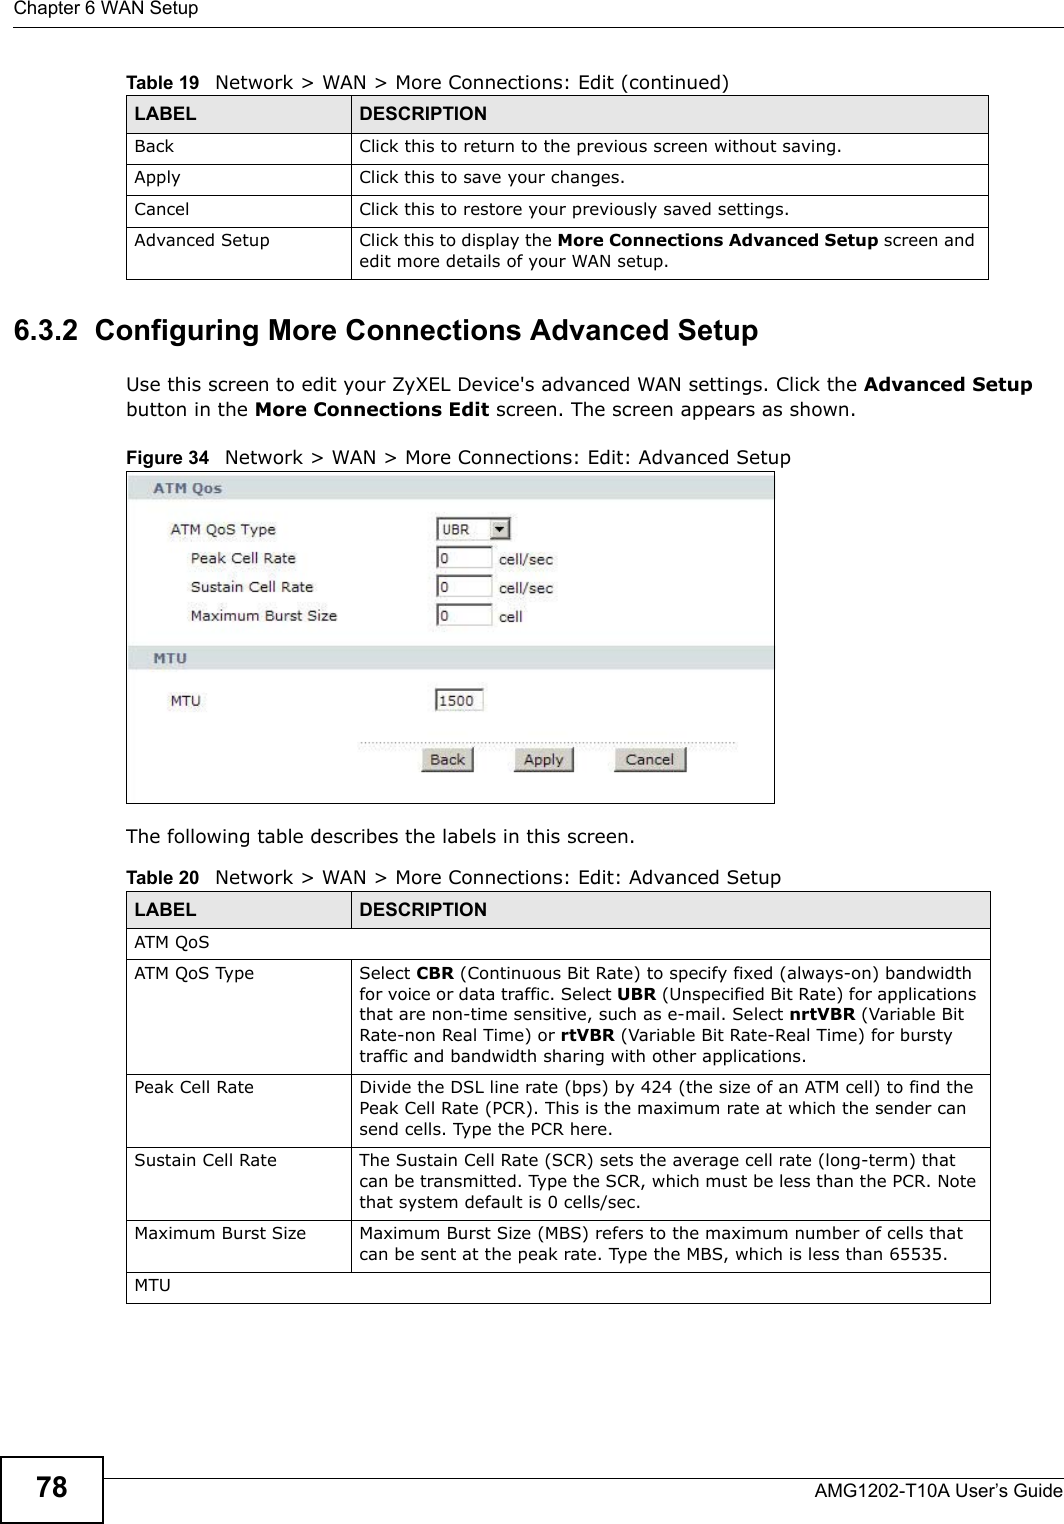 Chapter 6 WAN SetupAMG1202-T10A User’s Guide786.3.2  Configuring More Connections Advanced Setup Use this screen to edit your ZyXEL Device&apos;s advanced WAN settings. Click the Advanced Setup button in the More Connections Edit screen. The screen appears as shown.Figure 34   Network &gt; WAN &gt; More Connections: Edit: Advanced SetupThe following table describes the labels in this screen. Back Click this to return to the previous screen without saving.Apply Click this to save your changes. Cancel Click this to restore your previously saved settings.Advanced Setup Click this to display the More Connections Advanced Setup screen and edit more details of your WAN setup.Table 19   Network &gt; WAN &gt; More Connections: Edit (continued)LABEL DESCRIPTIONTable 20   Network &gt; WAN &gt; More Connections: Edit: Advanced SetupLABEL DESCRIPTIONATM QoSATM QoS Type Select CBR (Continuous Bit Rate) to specify fixed (always-on) bandwidth for voice or data traffic. Select UBR (Unspecified Bit Rate) for applications that are non-time sensitive, such as e-mail. Select nrtVBR (Variable Bit Rate-non Real Time) or rtVBR (Variable Bit Rate-Real Time) for bursty traffic and bandwidth sharing with other applications. Peak Cell Rate Divide the DSL line rate (bps) by 424 (the size of an ATM cell) to find the Peak Cell Rate (PCR). This is the maximum rate at which the sender can send cells. Type the PCR here.Sustain Cell Rate The Sustain Cell Rate (SCR) sets the average cell rate (long-term) that can be transmitted. Type the SCR, which must be less than the PCR. Note that system default is 0 cells/sec. Maximum Burst Size Maximum Burst Size (MBS) refers to the maximum number of cells that can be sent at the peak rate. Type the MBS, which is less than 65535. MTU